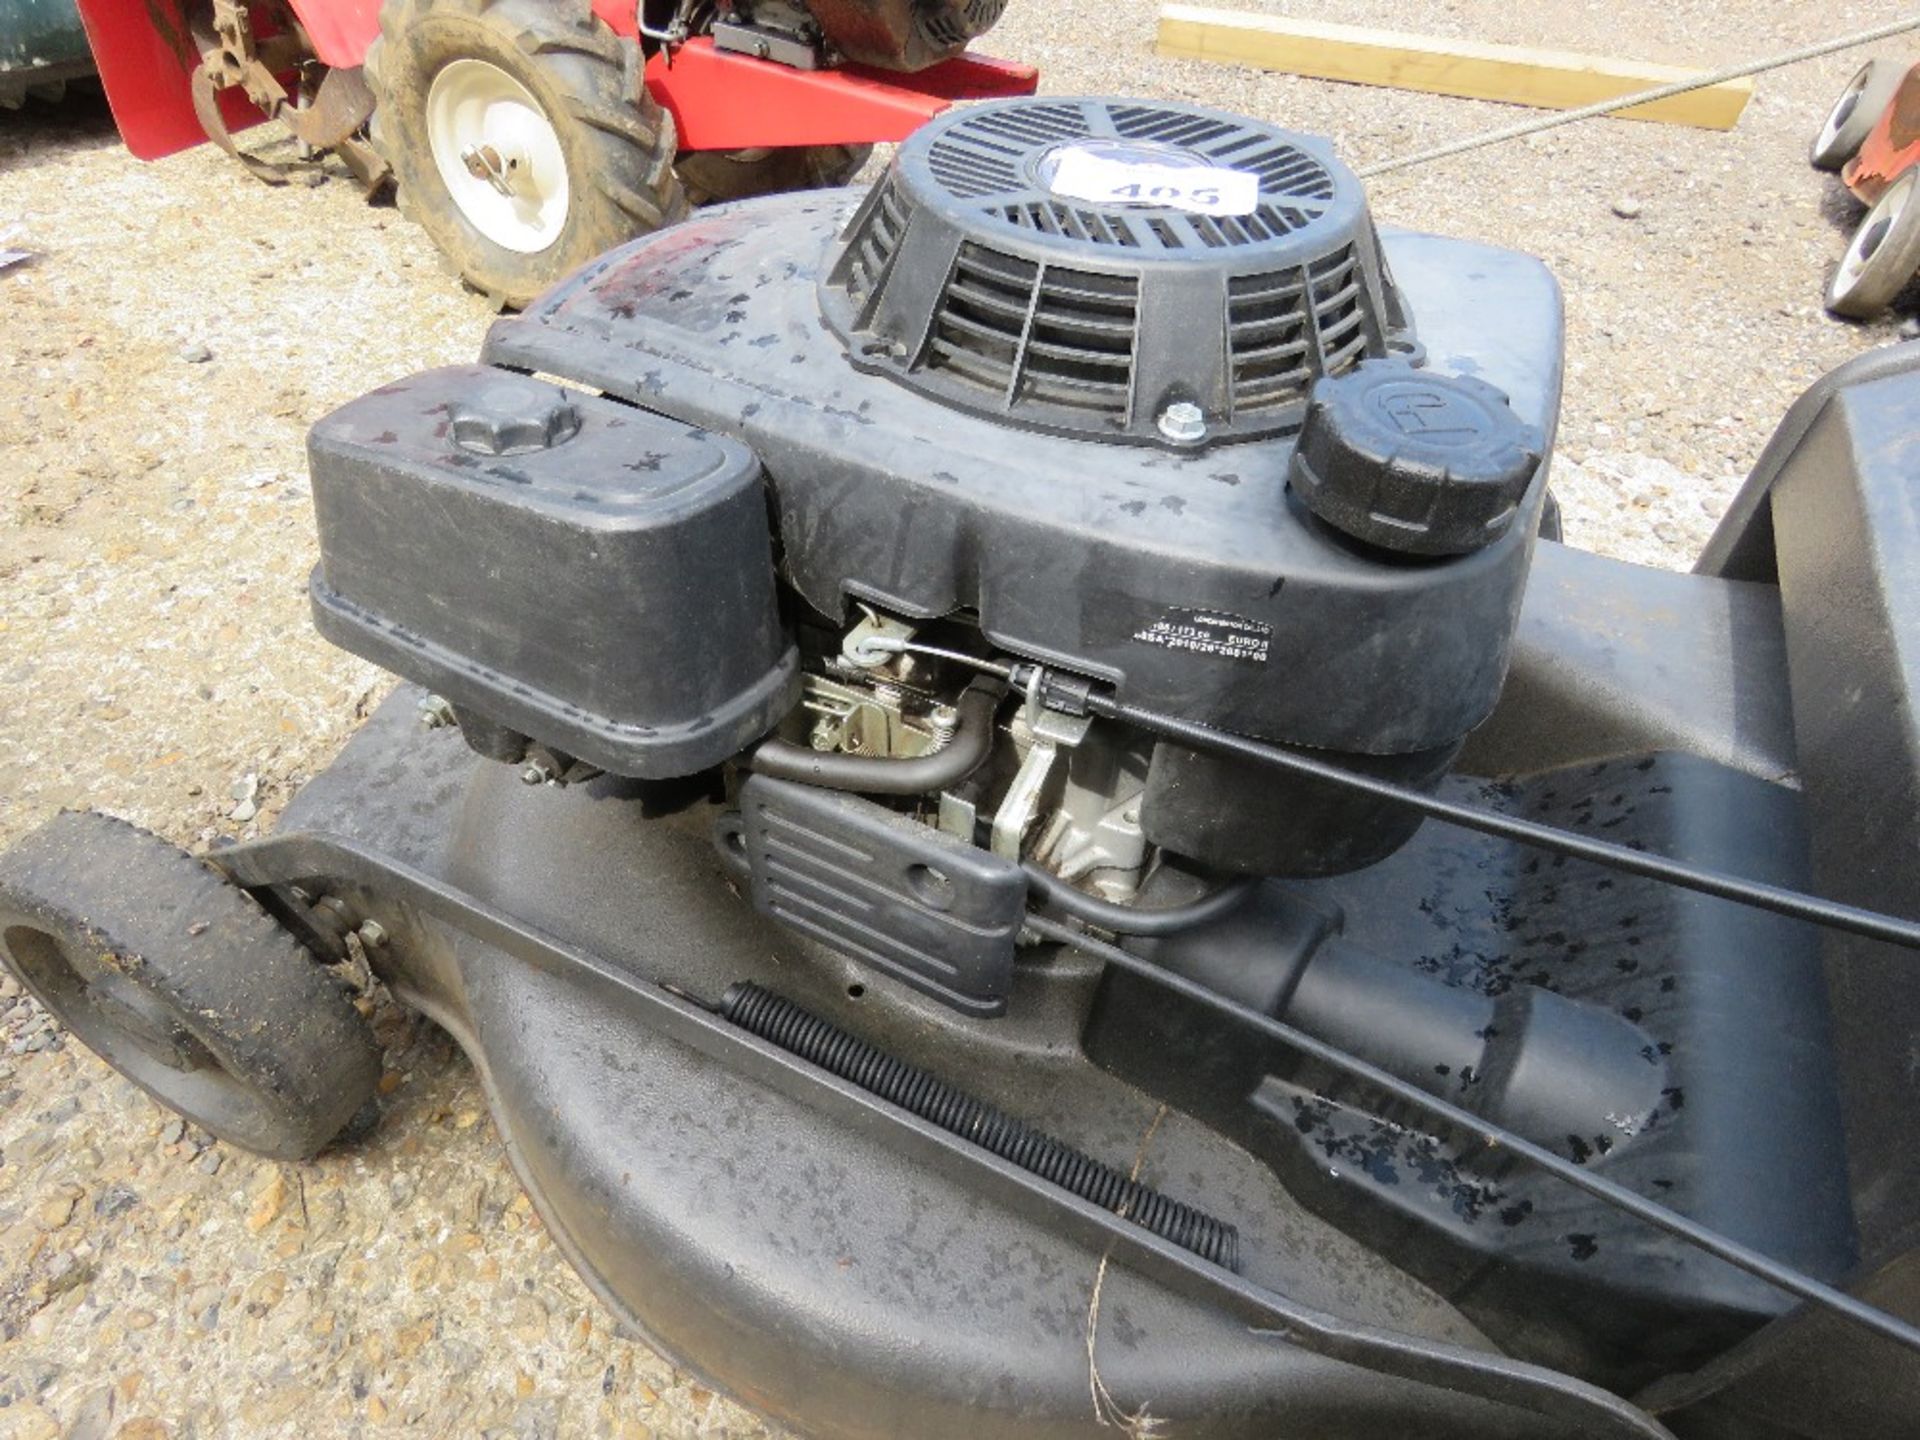 WEIBANG PETROL ENGINED LAWNMOWER, NO COLLECTOR. THIS LOT IS SOLD UNDER THE AUCTIONEERS MARGIN SCH - Image 3 of 4